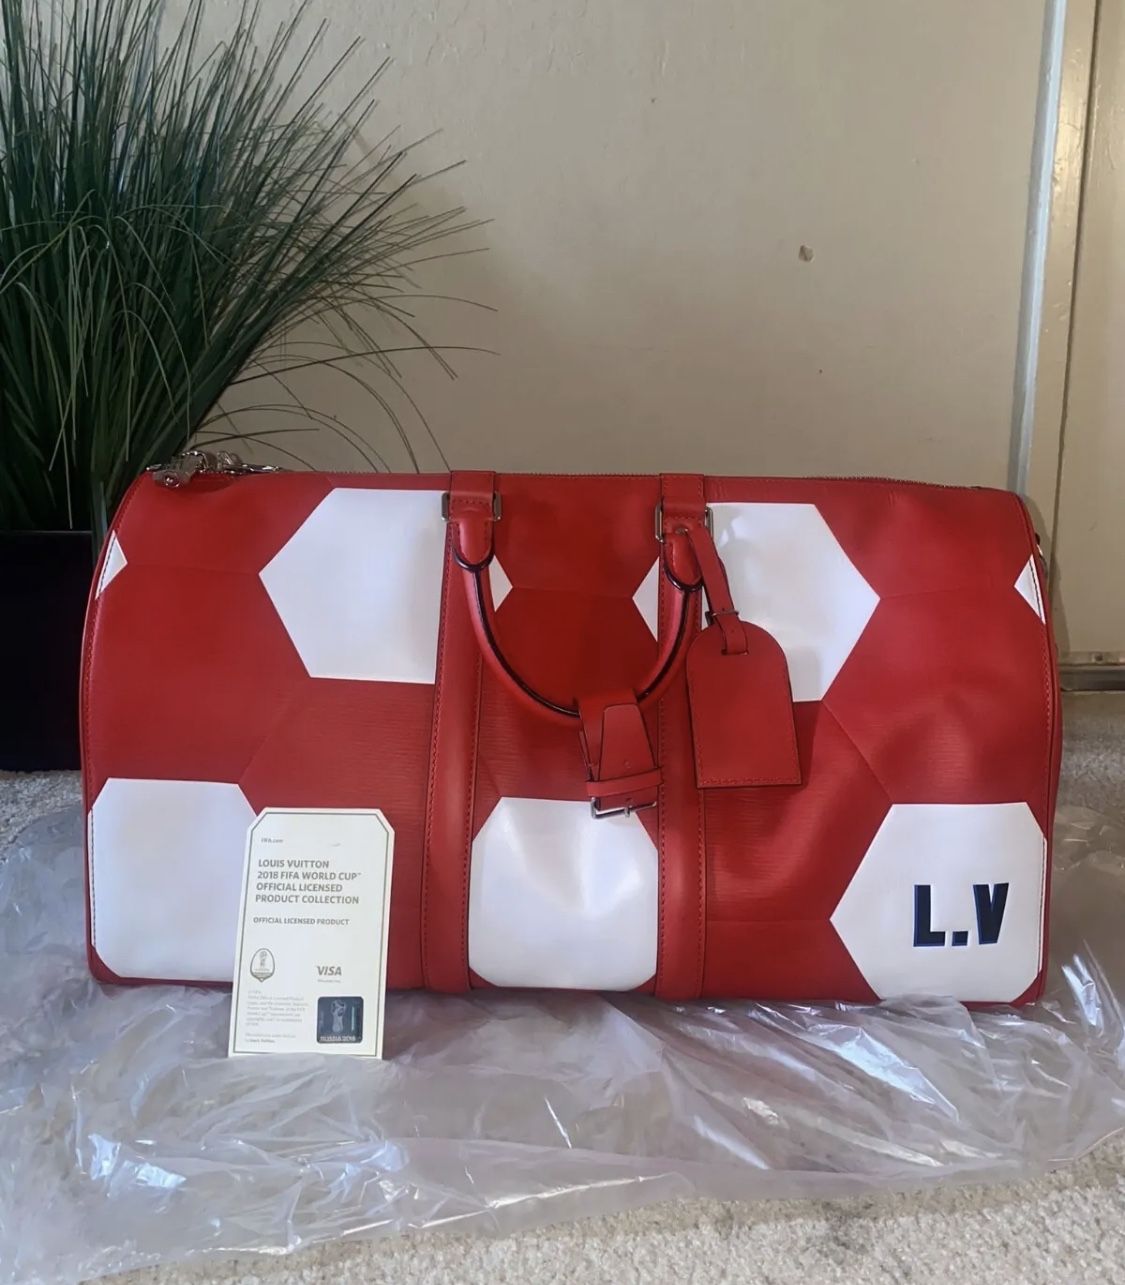 Louis Vuitton Cup second hand prices